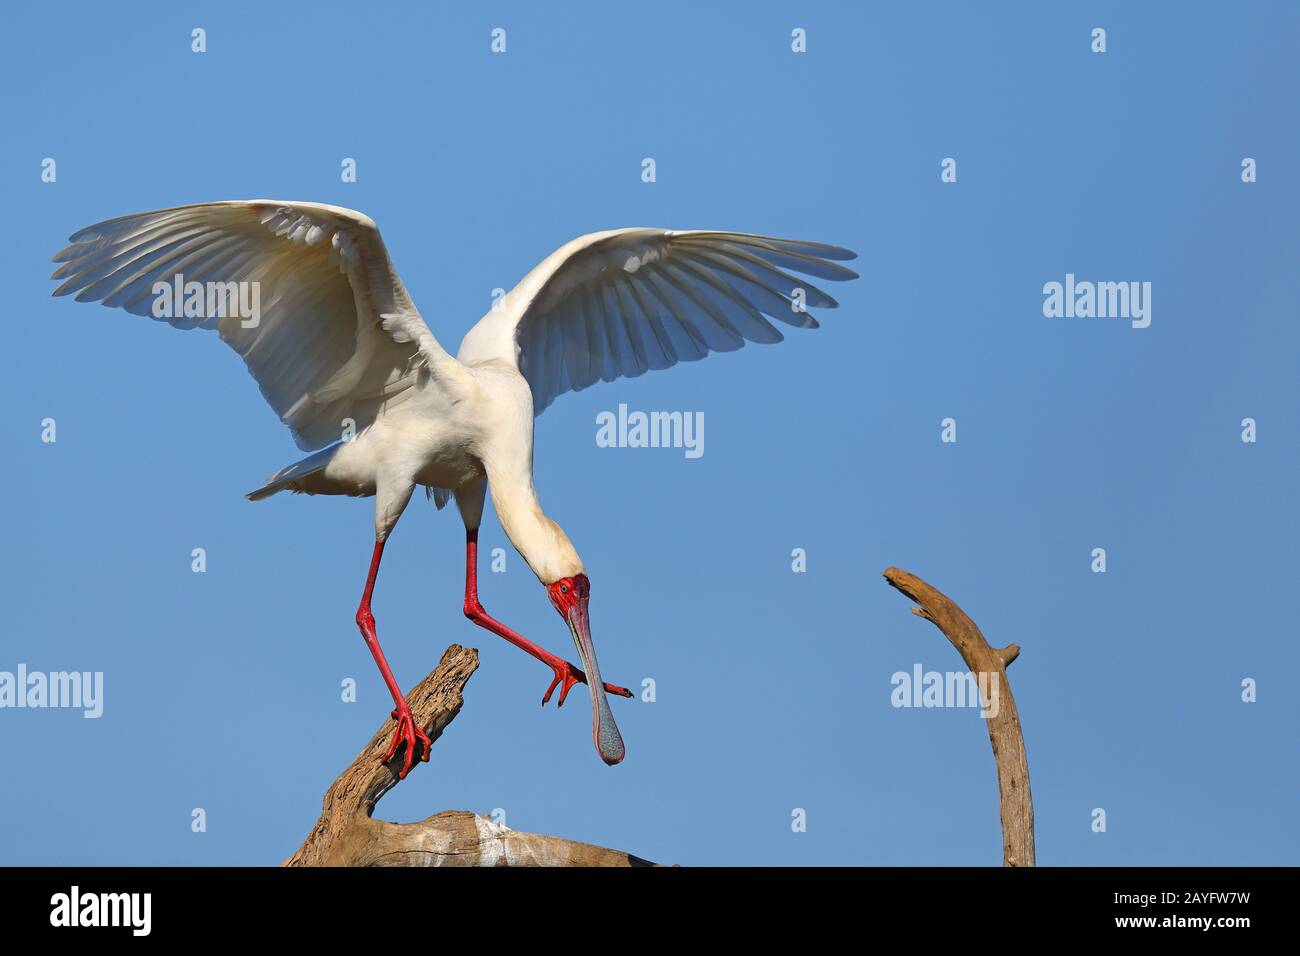 African spoonbill (Platalea alba), stands on a dead tree with wings outstretched, South Africa, Kwazulu-Natal, Mkhuze Game Reserve Stock Photo